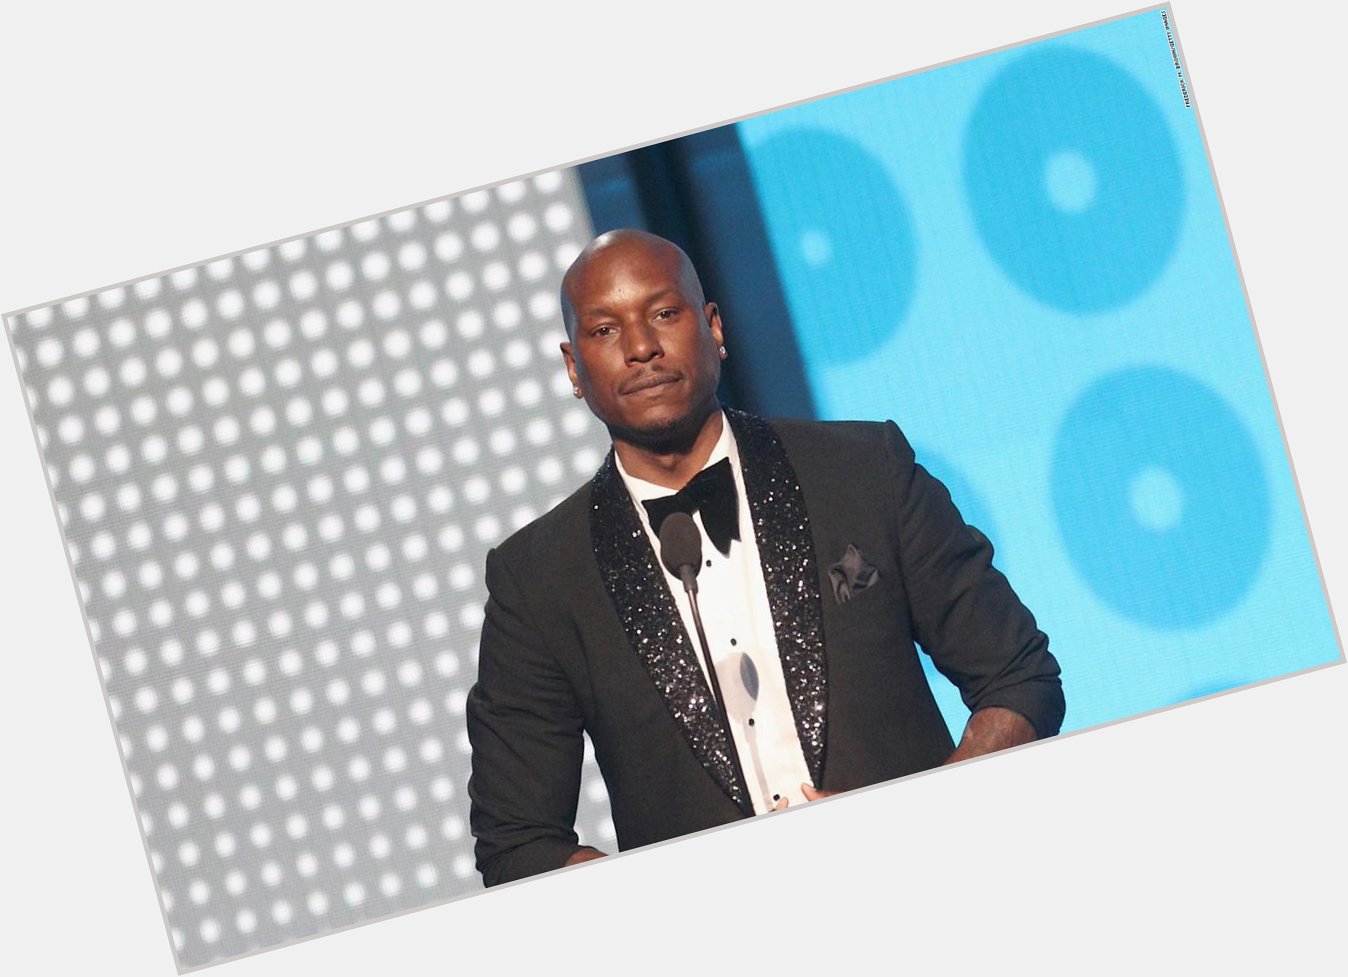 Happy Birthday to Tyrese Gibson who turns 39 today! 